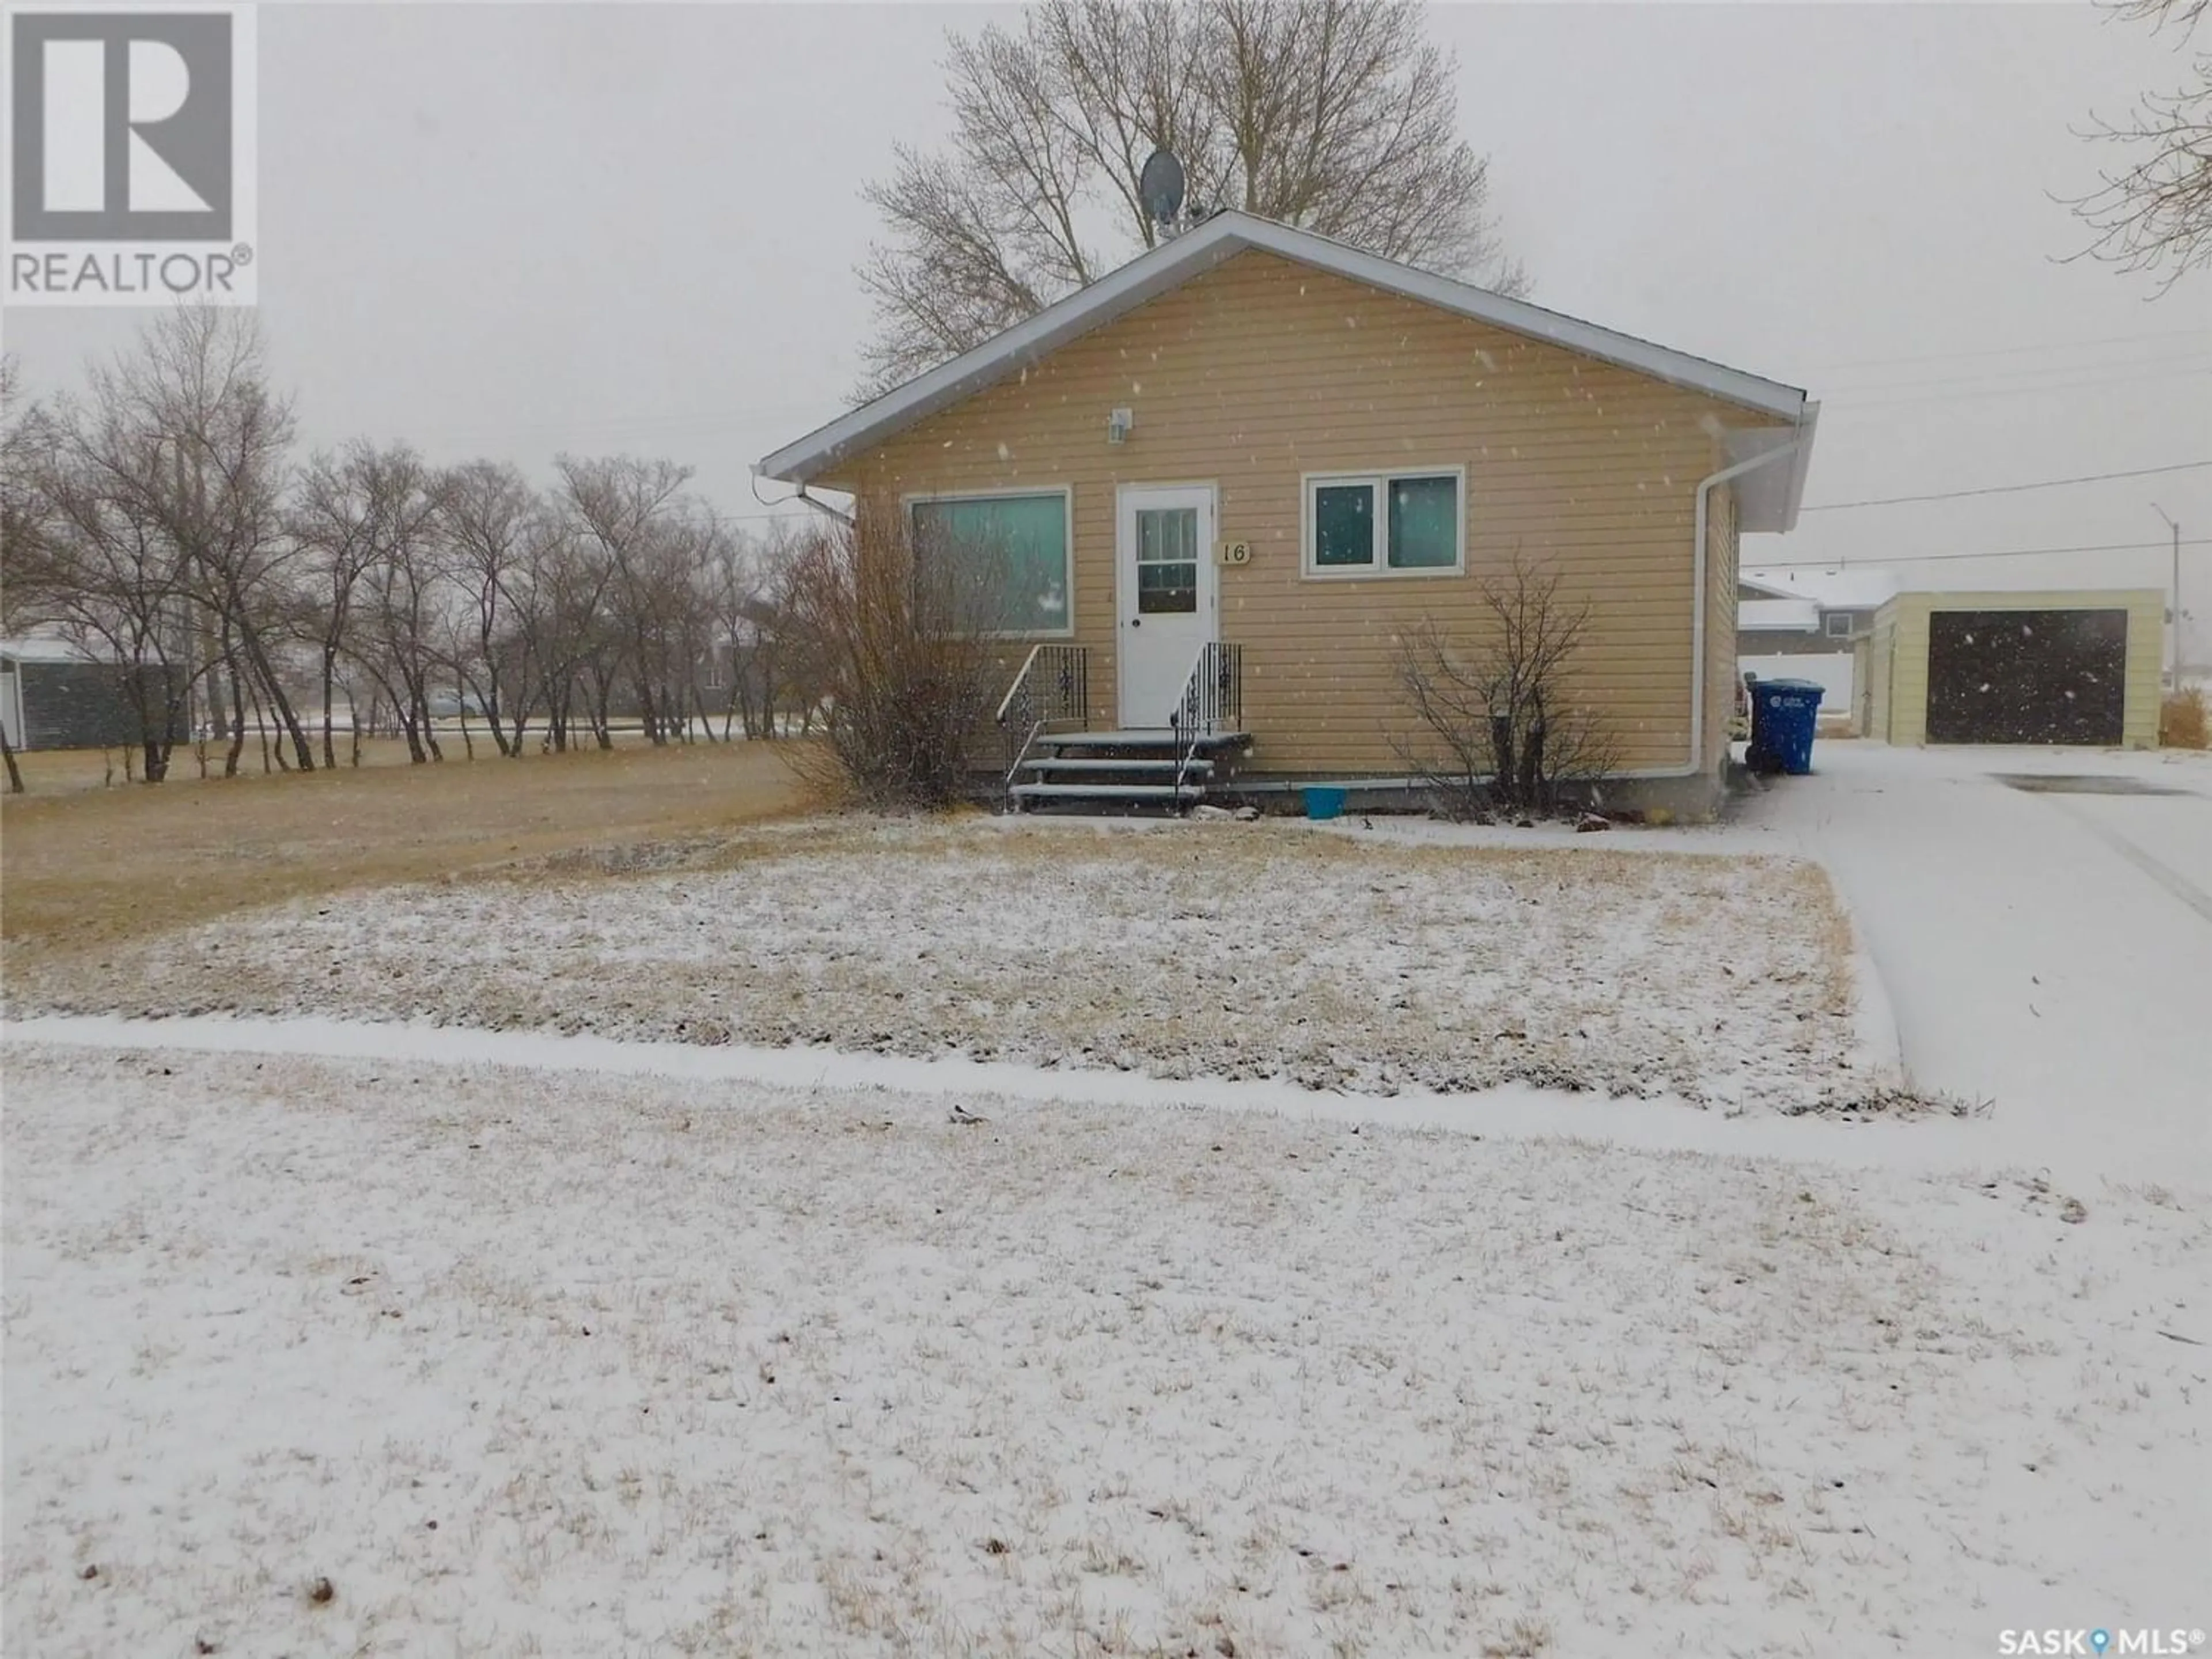 Home with unknown exterior material for 16 H AVENUE, Willow Bunch Saskatchewan S0H4K0